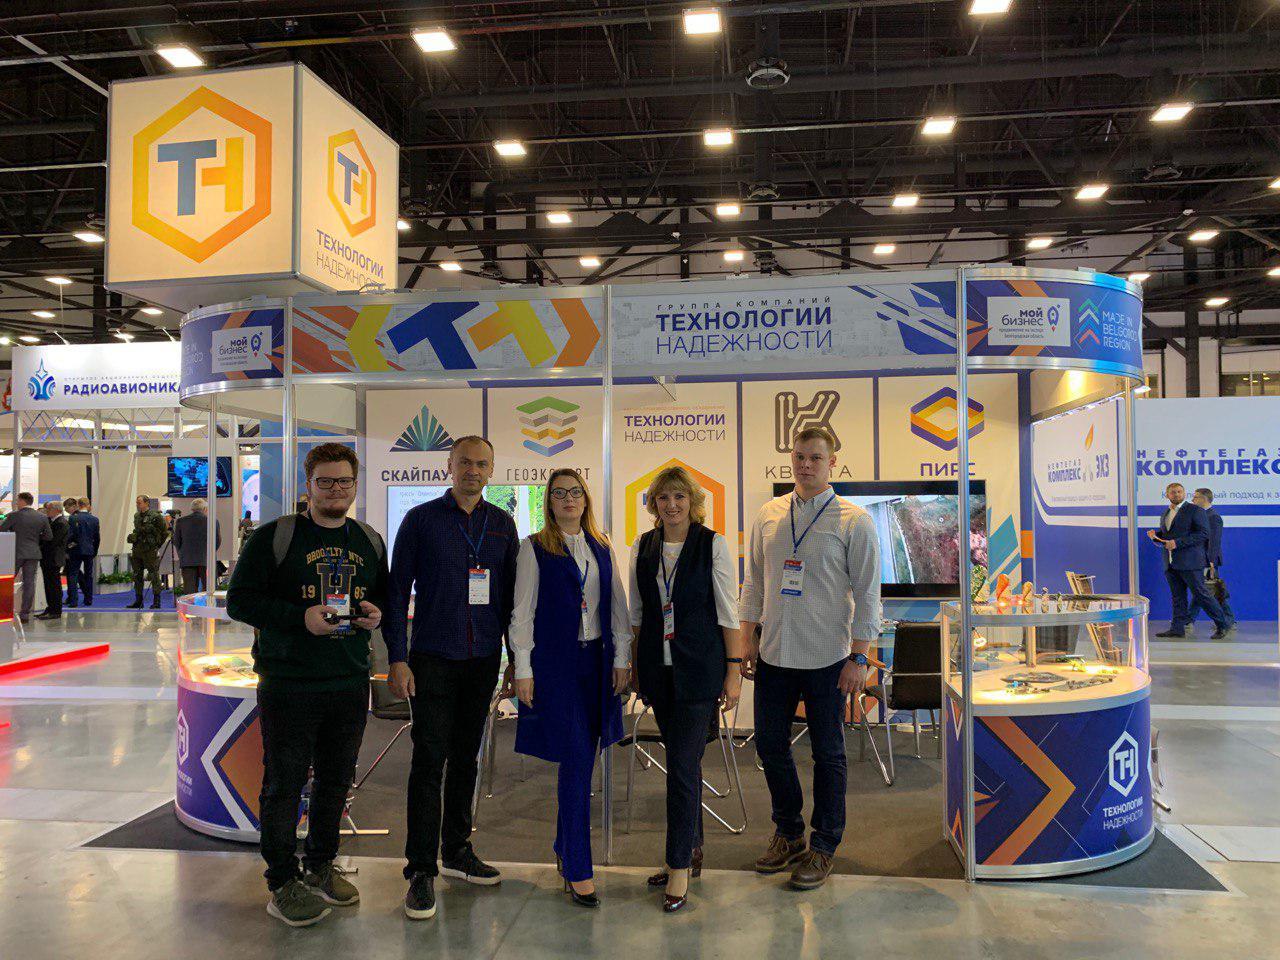 Business, science and industry: TH Group exhibited their projects at the 23rd Russian Industrialist International Forum